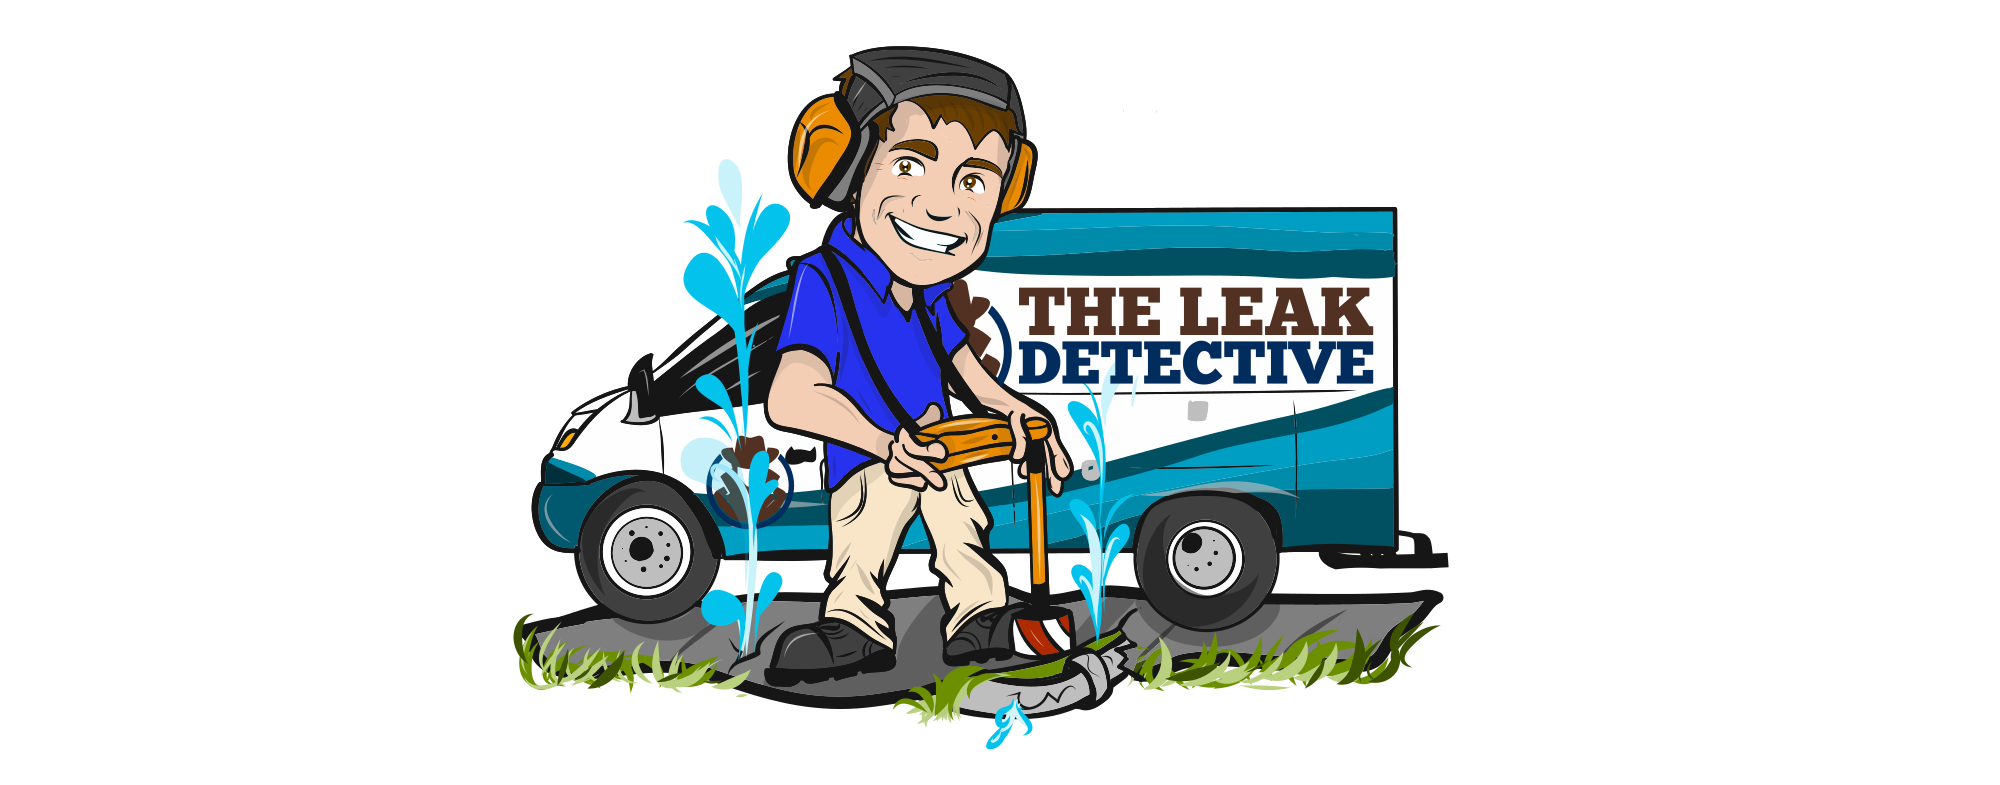 leakdetective_toon.png